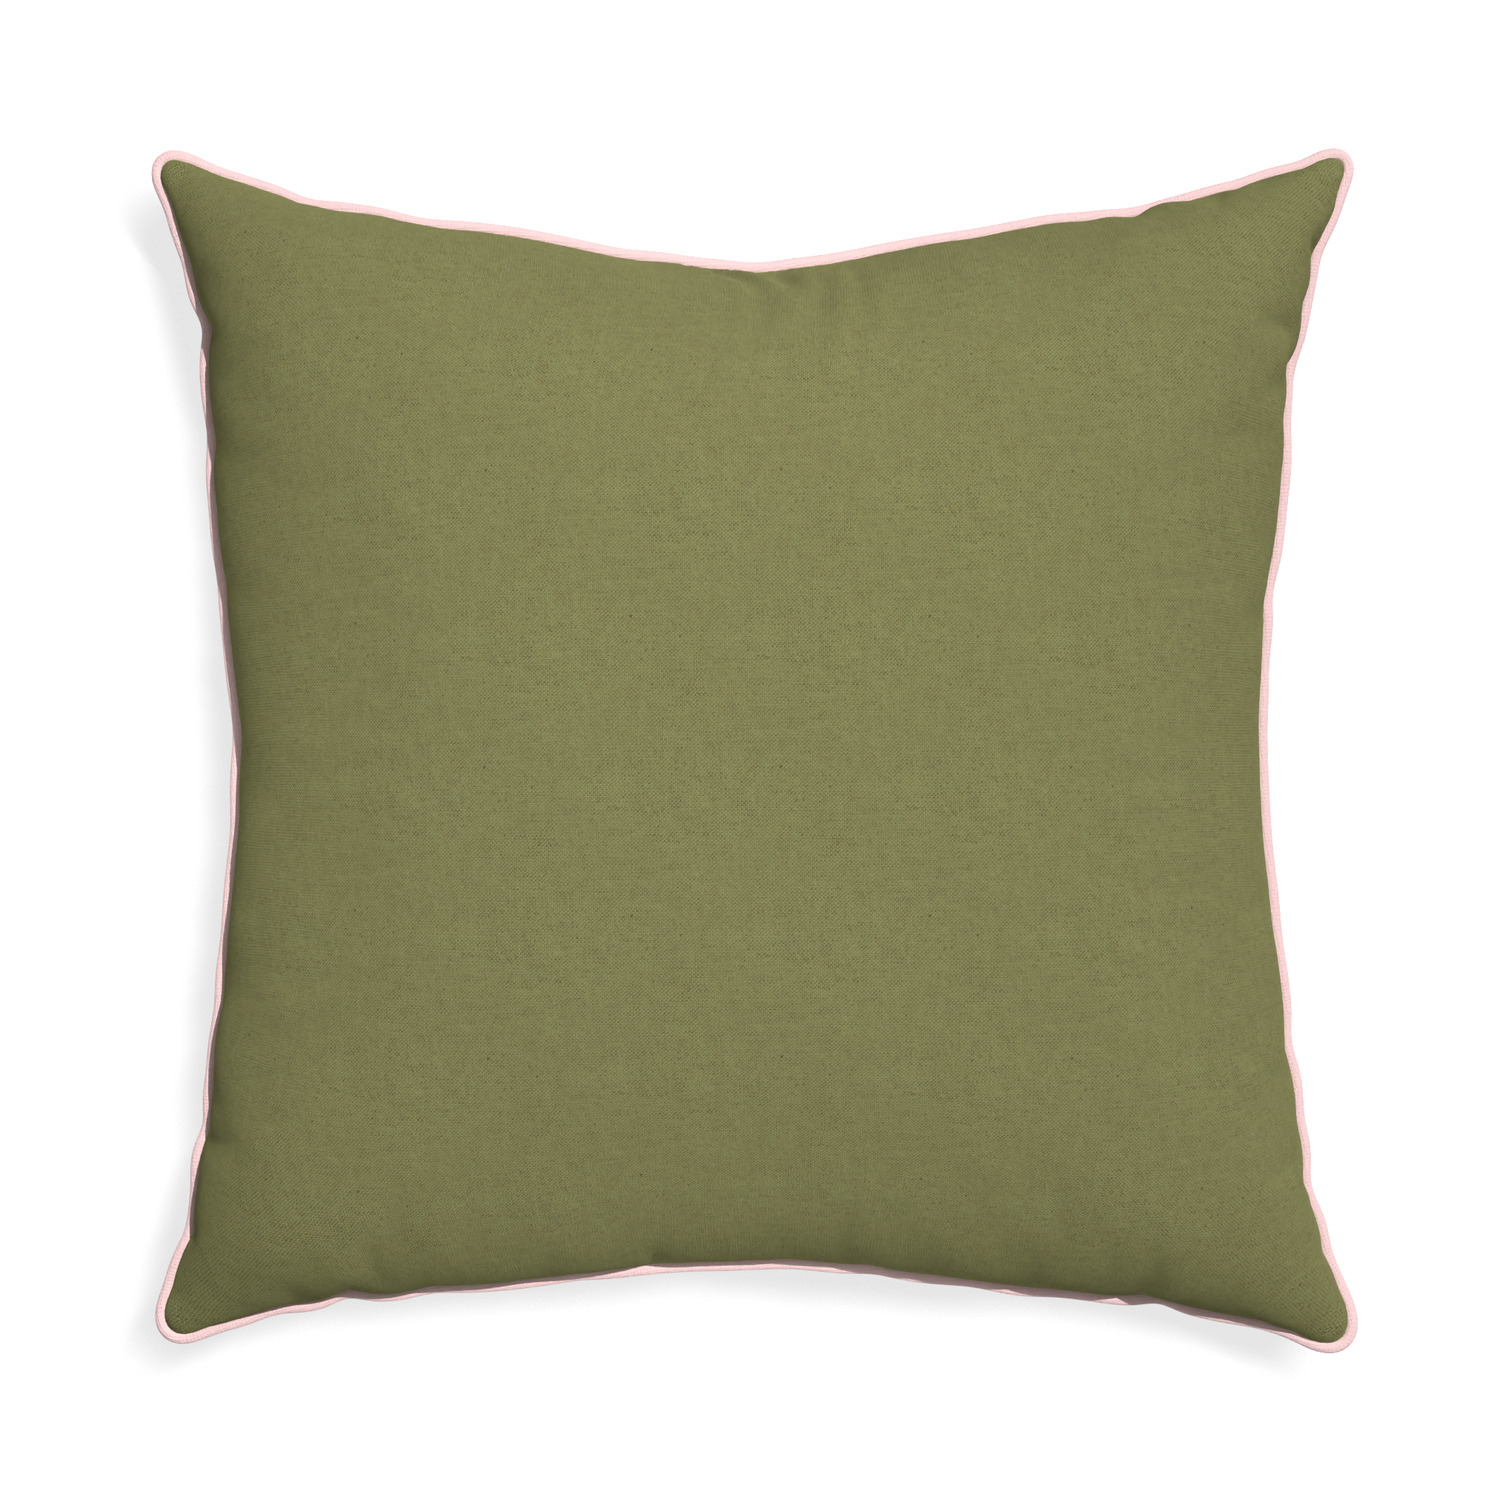 Euro-sham moss custom moss greenpillow with petal piping on white background